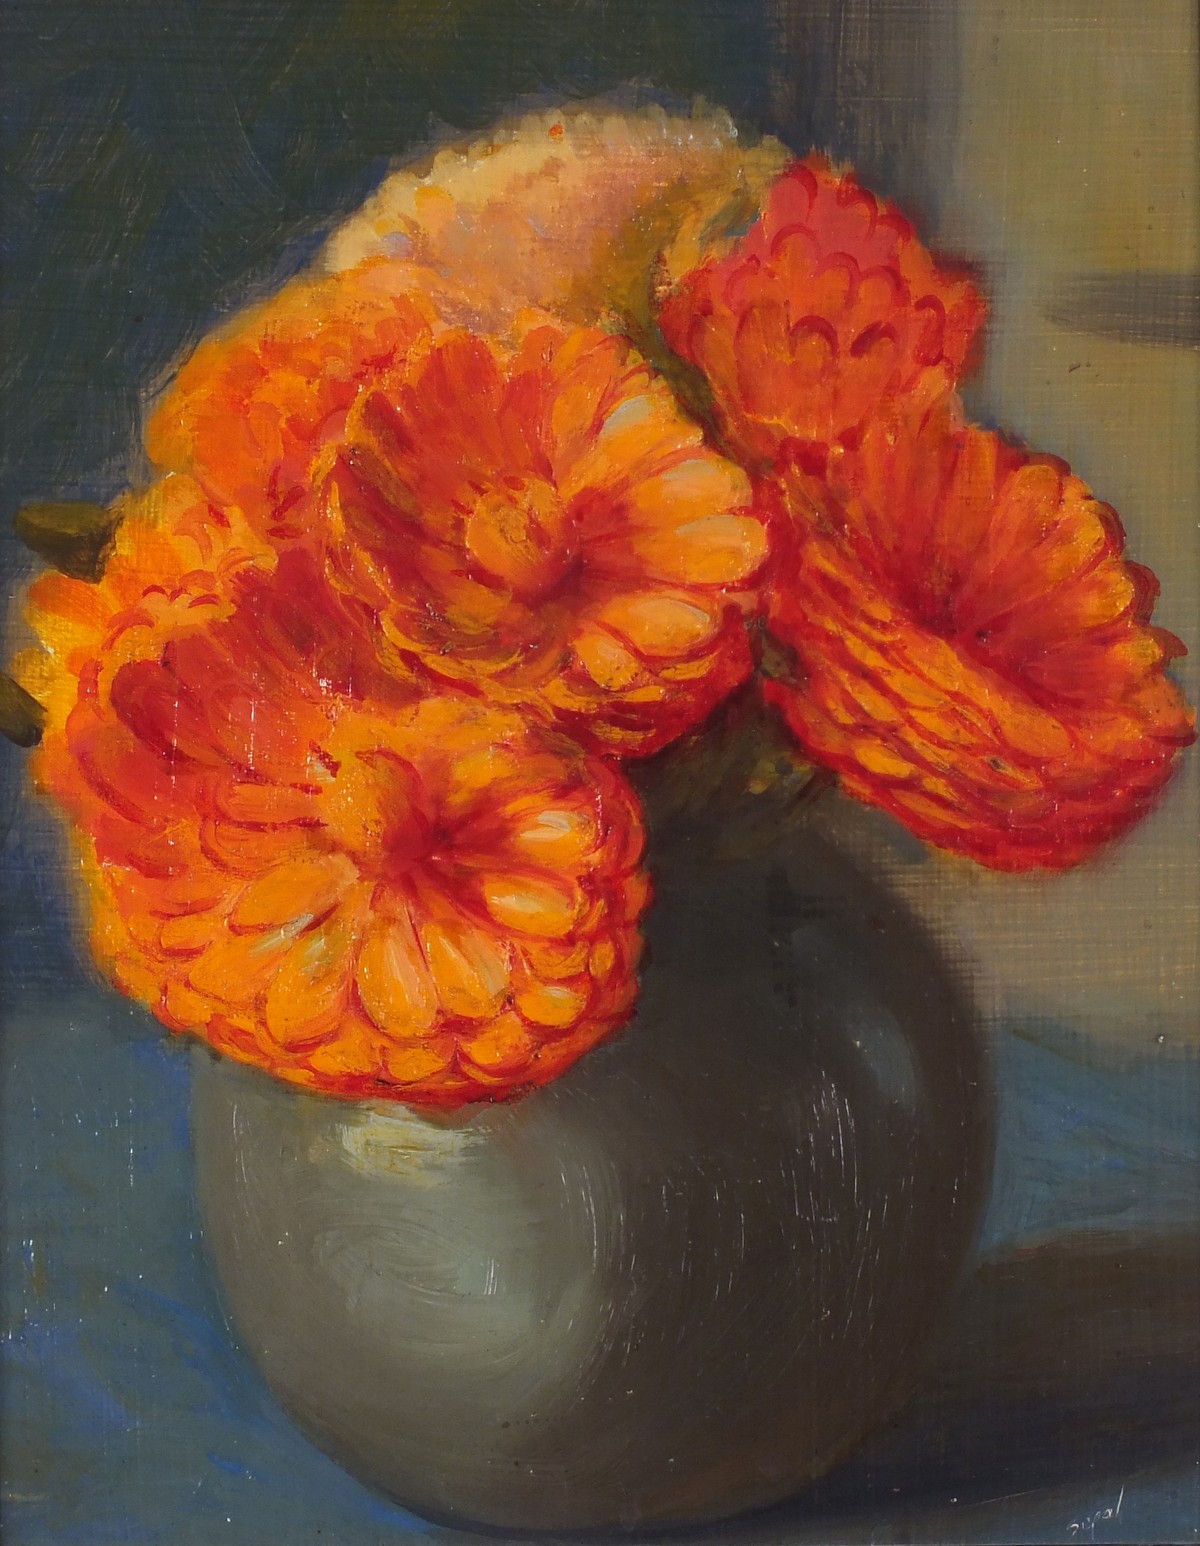 Hyman SEGAL (British 1914-2004) Marigolds in a Vase, Oil on board, Signed lower right, artist's